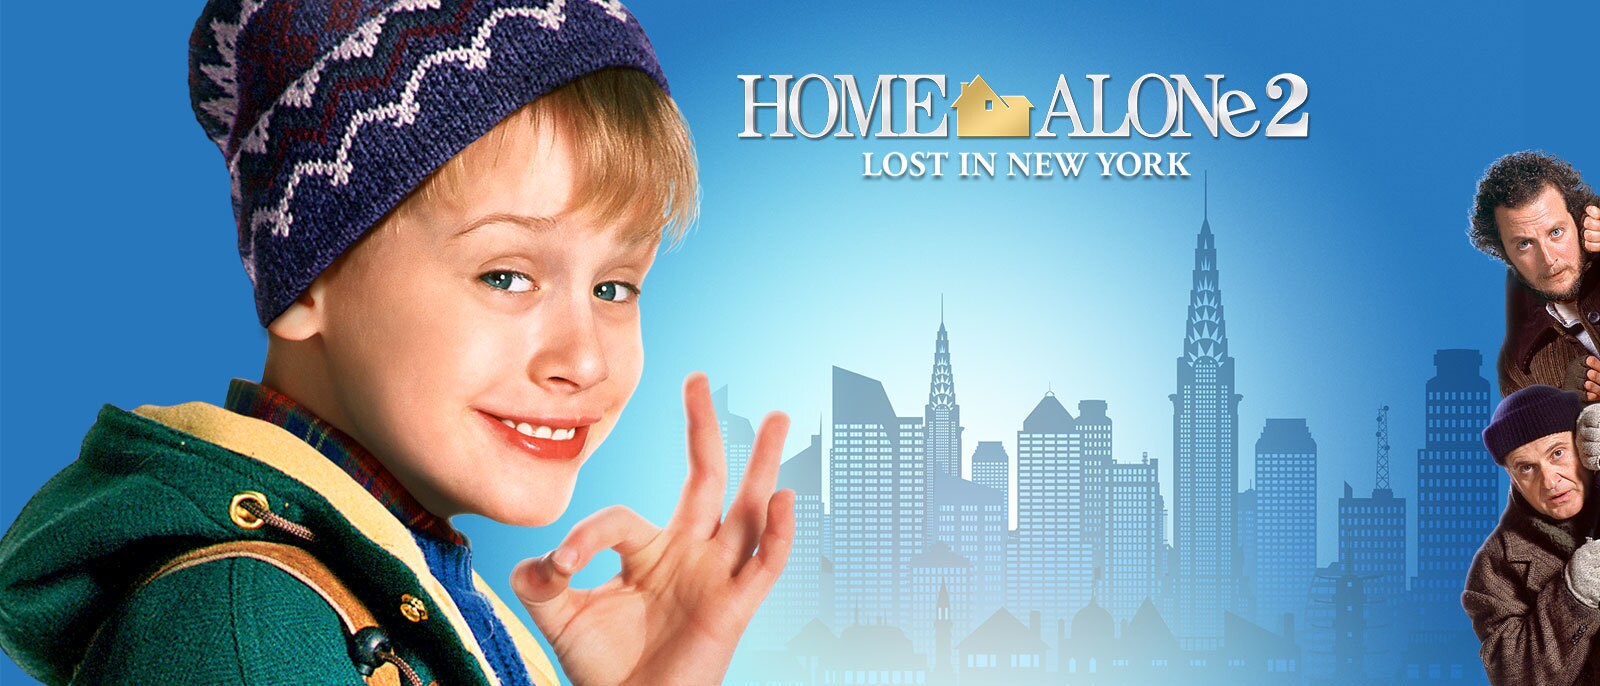 Home Alone 2 Lost in New York 20th Century Studios Family